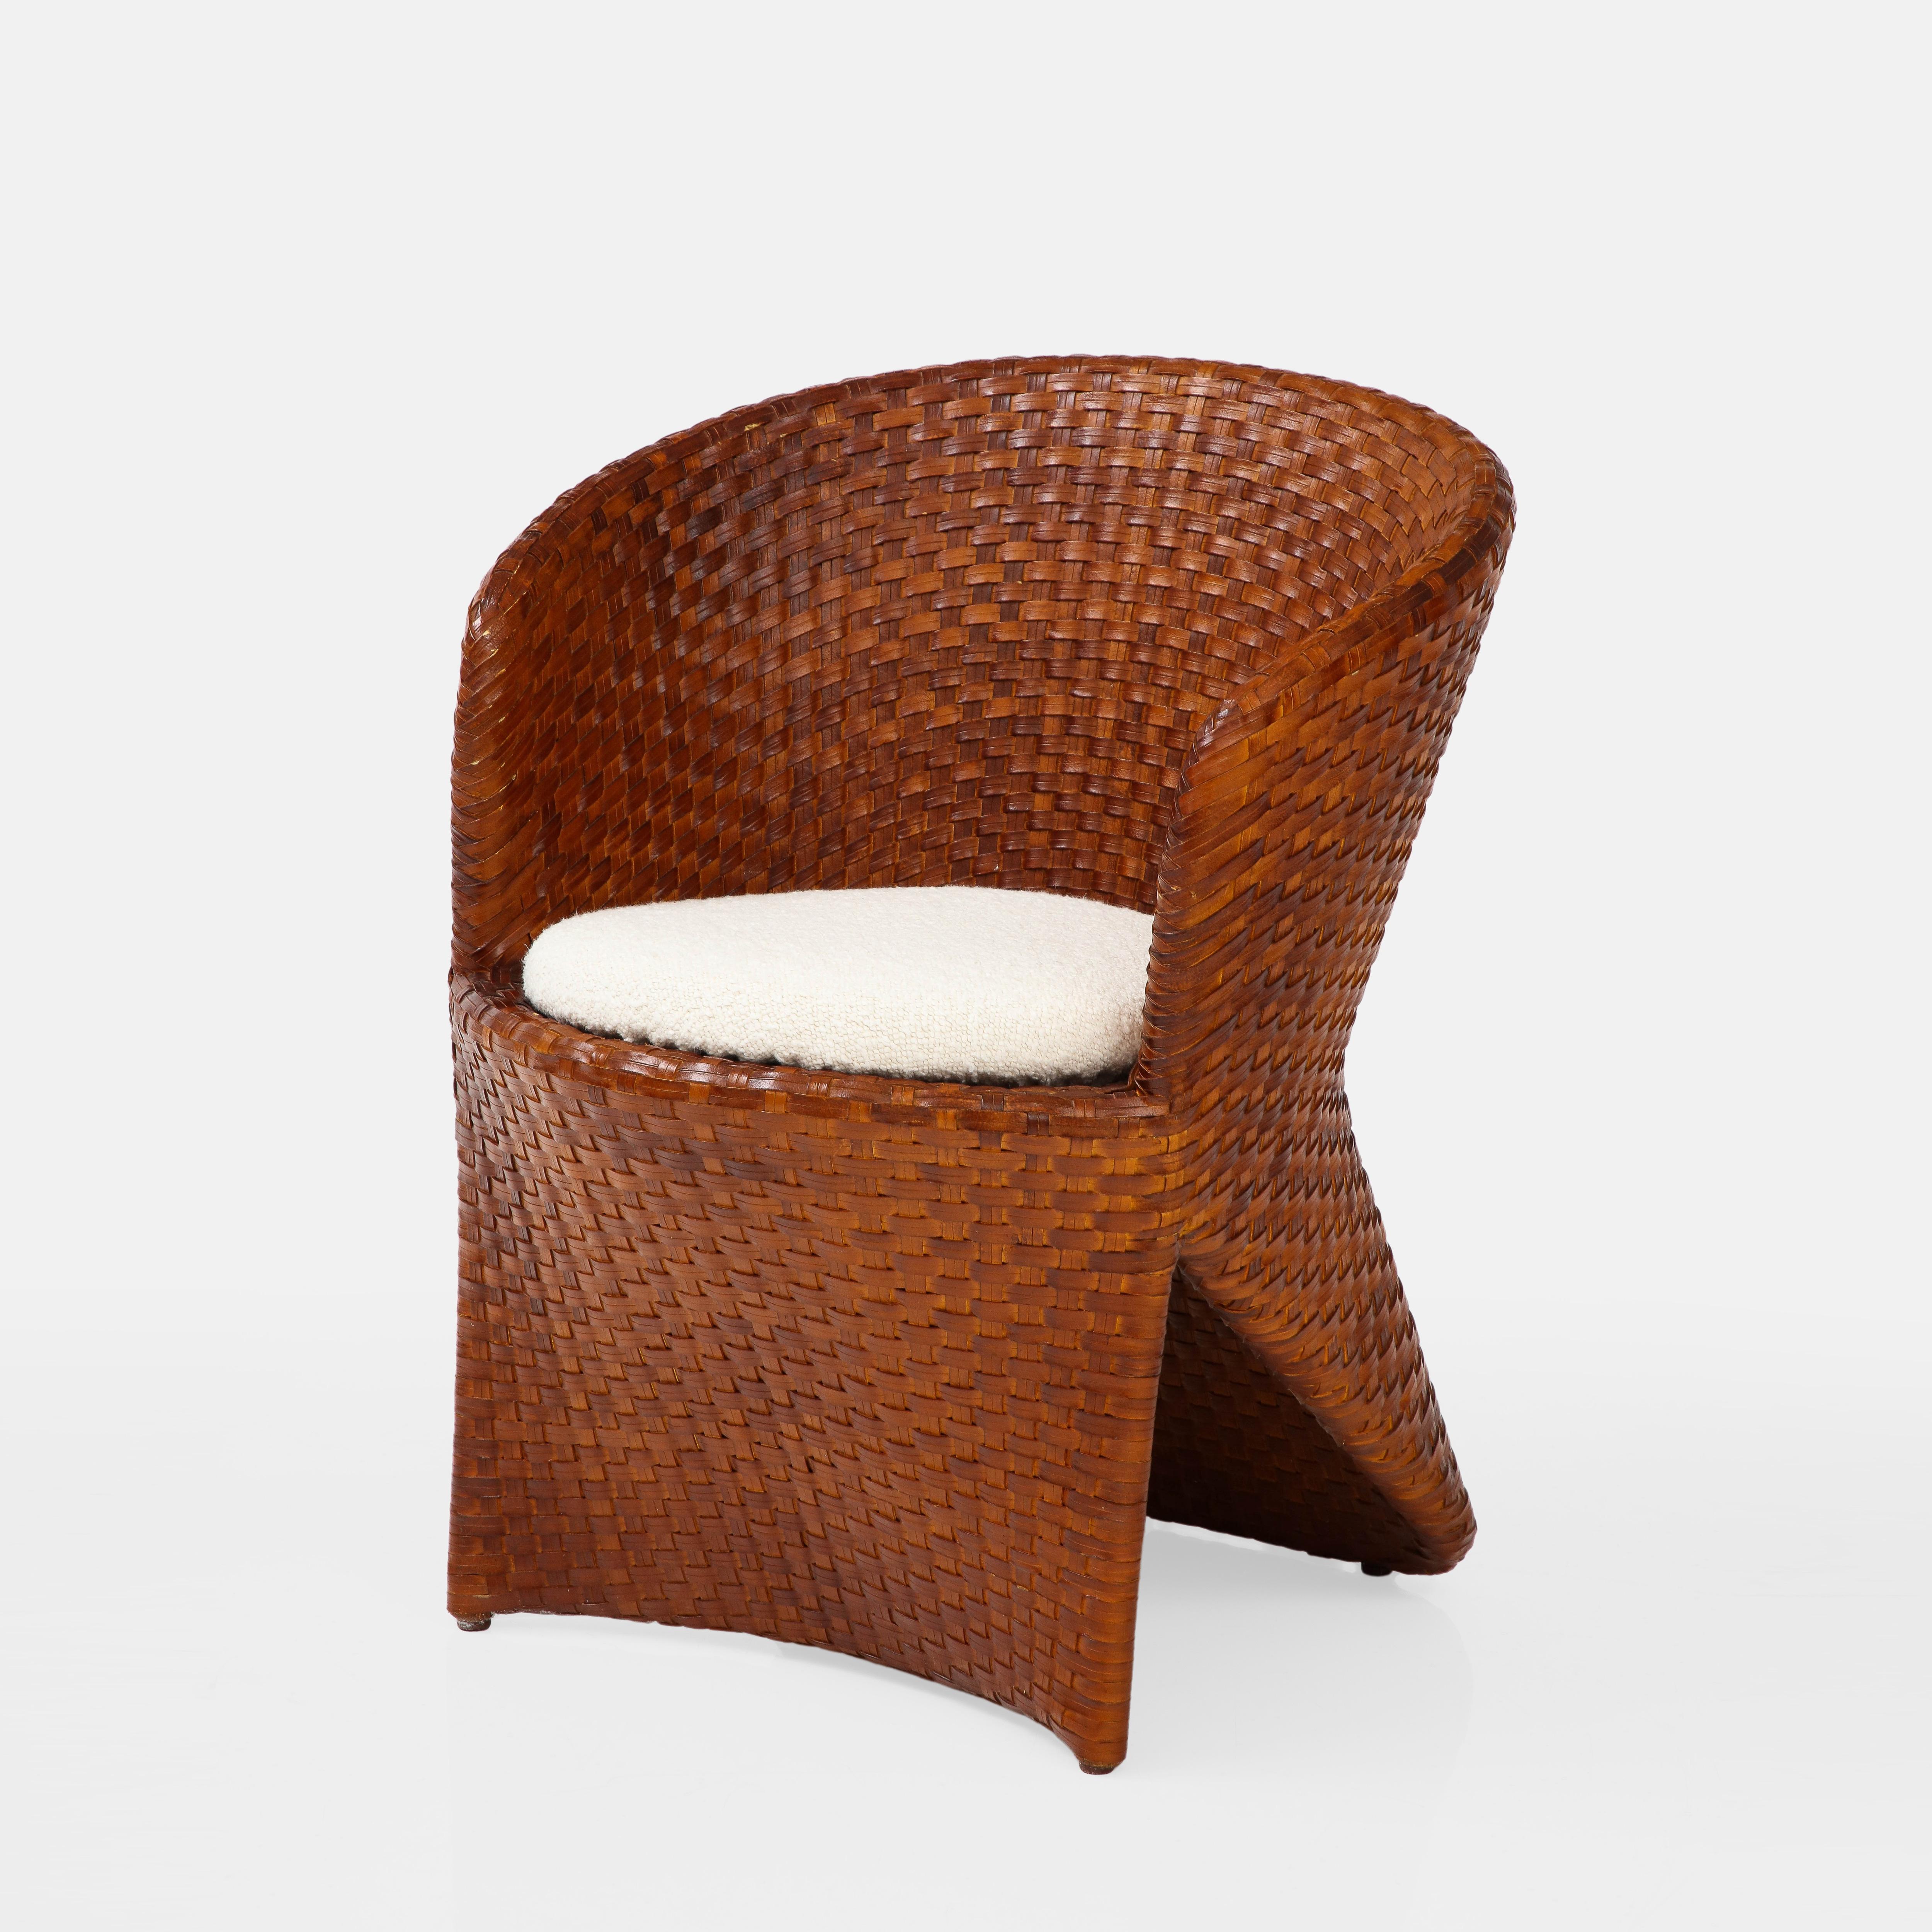 Tito Agnoli for Bonacina Rare Carabou Dining Set in Rattan and Cherry Wood, 1991 For Sale 1